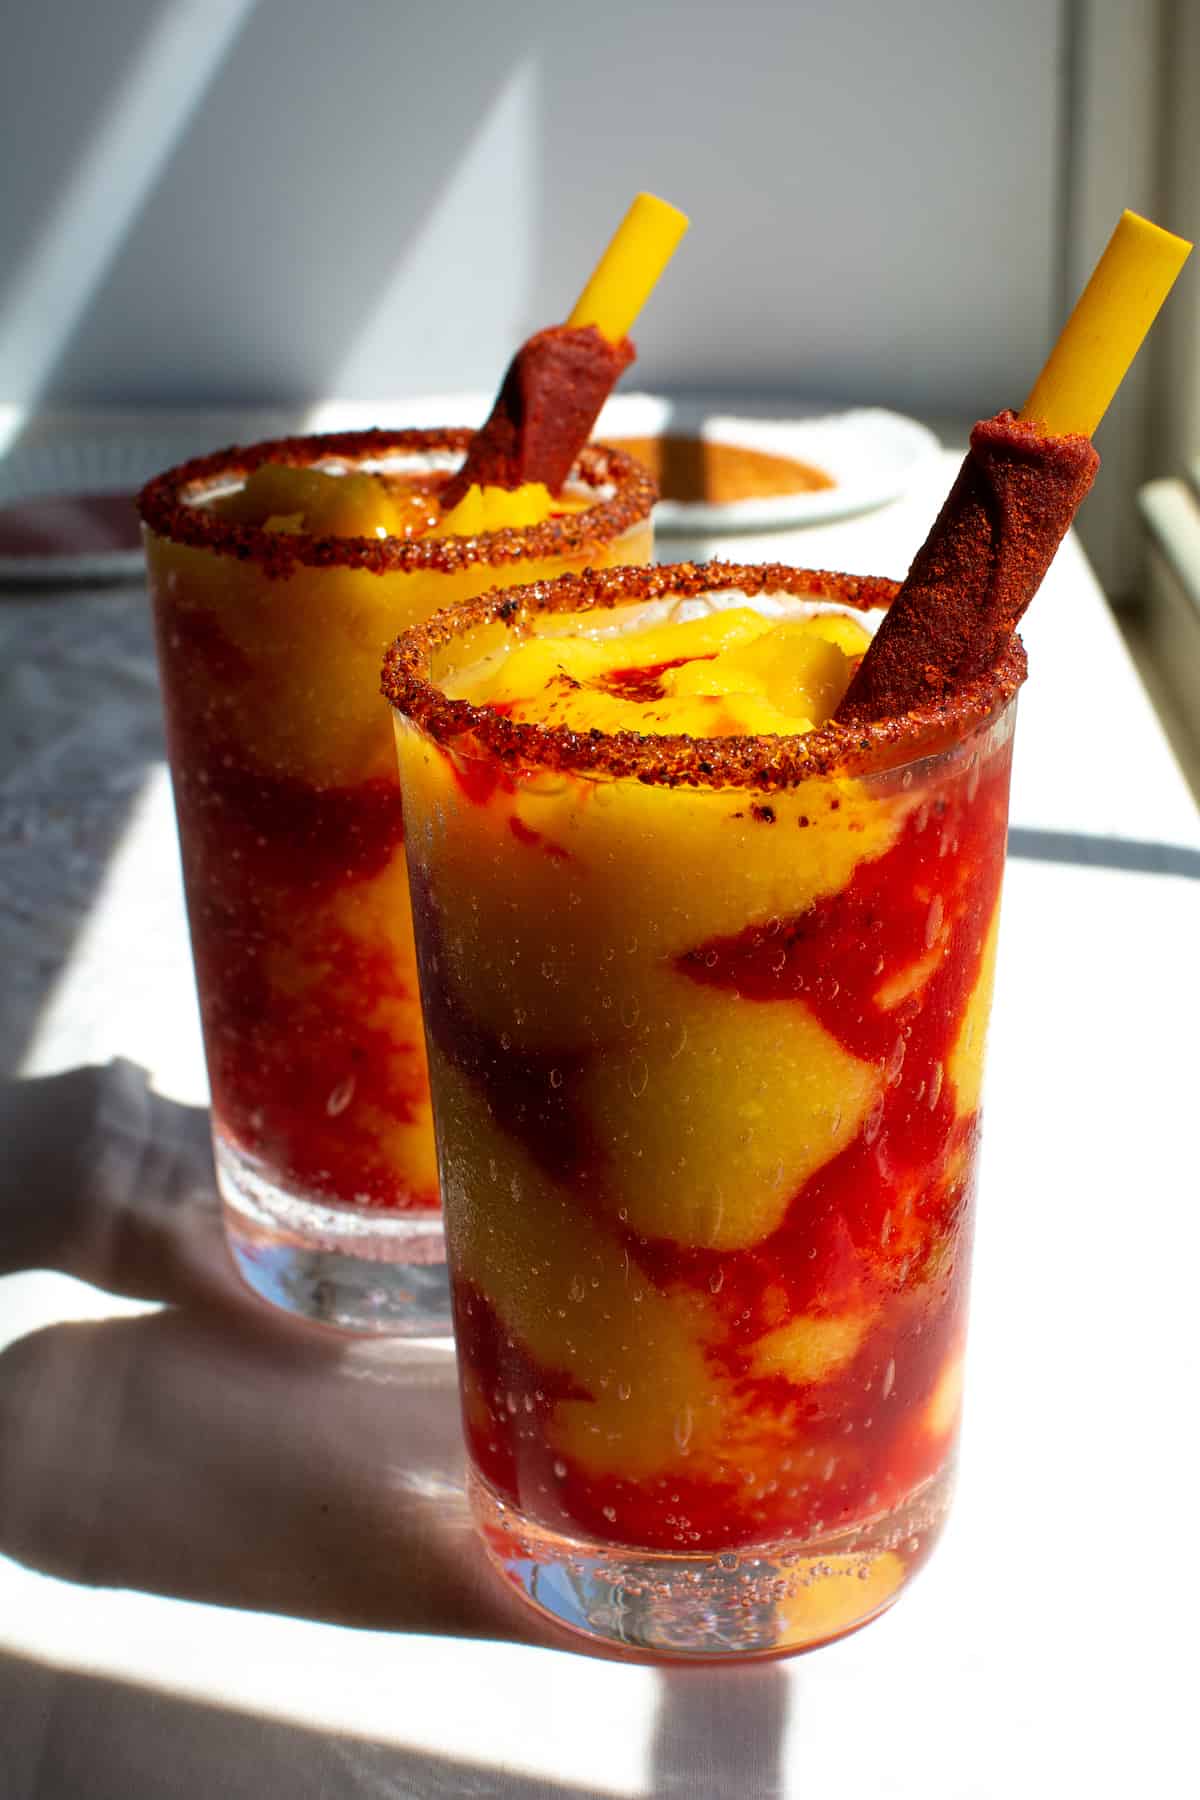 How to make a Mangonada! If you've ever had this sweet, sour, salty mango slushy than you know how perfect it is on a hot day. Layers of frozen mango smoothie, Chamoy sauce and Tajin. So easy and so satisfying, bring it on summer! #mangonada #mangosmoothie #mexicancuisine #mangoslushy